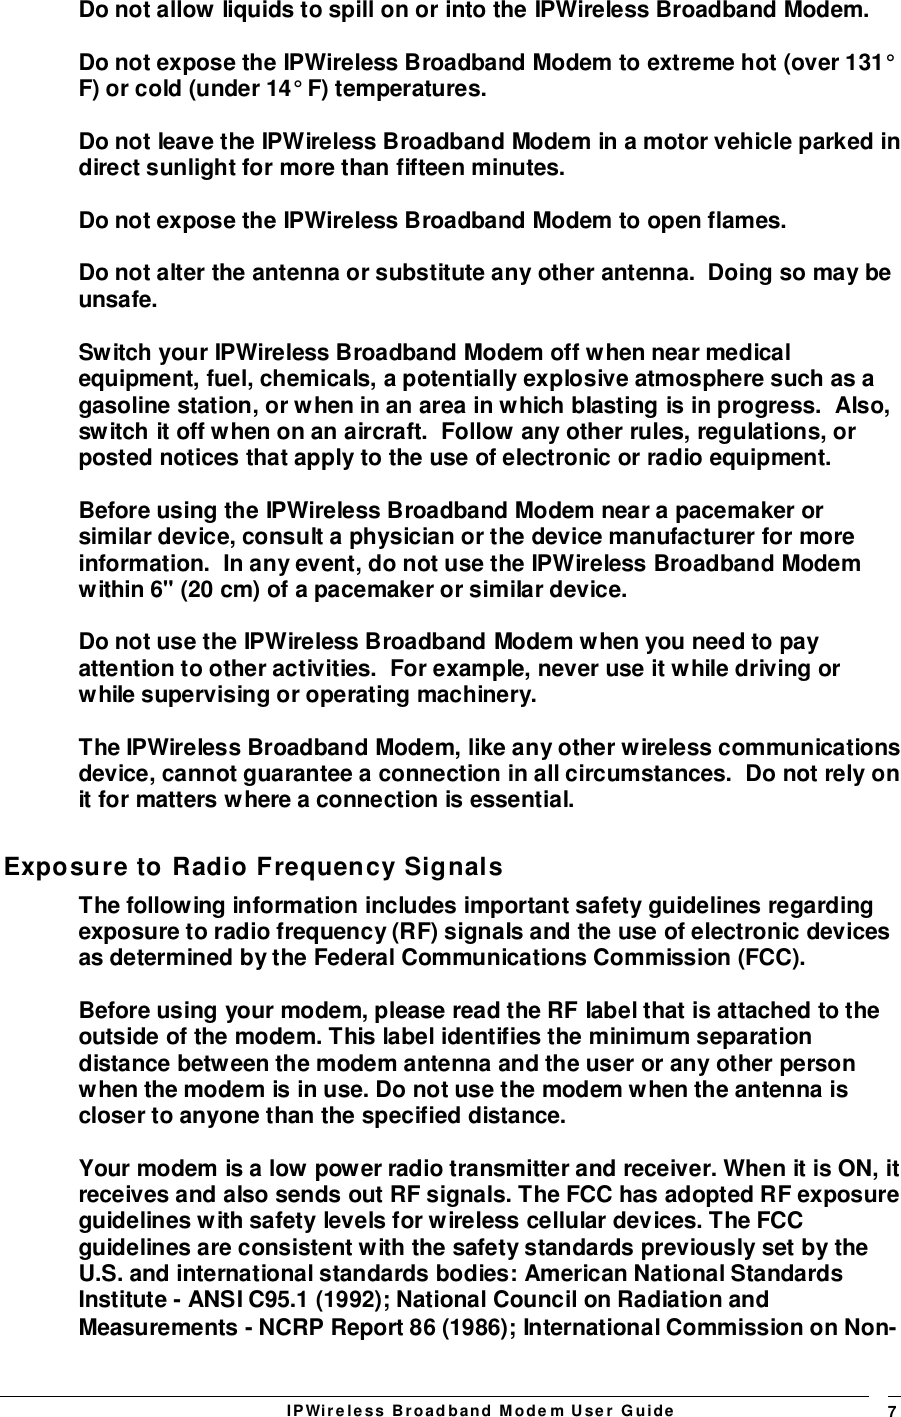 IPWireless Broadband Modem User Guide 7Do not allow liquids to spill on or into the IPWireless Broadband Modem.Do not expose the IPWireless Broadband Modem to extreme hot (over 131°F) or cold (under 14° F) temperatures.Do not leave the IPWireless Broadband Modem in a motor vehicle parked indirect sunlight for more than fifteen minutes.Do not expose the IPWireless Broadband Modem to open flames.Do not alter the antenna or substitute any other antenna.  Doing so may beunsafe.Switch your IPWireless Broadband Modem off when near medicalequipment, fuel, chemicals, a potentially explosive atmosphere such as agasoline station, or when in an area in which blasting is in progress.  Also,switch it off when on an aircraft.  Follow any other rules, regulations, orposted notices that apply to the use of electronic or radio equipment.Before using the IPWireless Broadband Modem near a pacemaker orsimilar device, consult a physician or the device manufacturer for moreinformation.  In any event, do not use the IPWireless Broadband Modemwithin 6&quot; (20 cm) of a pacemaker or similar device.Do not use the IPWireless Broadband Modem when you need to payattention to other activities.  For example, never use it while driving orwhile supervising or operating machinery.The IPWireless Broadband Modem, like any other wireless communicationsdevice, cannot guarantee a connection in all circumstances.  Do not rely onit for matters where a connection is essential.Exposure to Radio Frequency SignalsThe following information includes important safety guidelines regardingexposure to radio frequency (RF) signals and the use of electronic devicesas determined by the Federal Communications Commission (FCC).Before using your modem, please read the RF label that is attached to theoutside of the modem. This label identifies the minimum separationdistance between the modem antenna and the user or any other personwhen the modem is in use. Do not use the modem when the antenna iscloser to anyone than the specified distance.Your modem is a low power radio transmitter and receiver. When it is ON, itreceives and also sends out RF signals. The FCC has adopted RF exposureguidelines with safety levels for wireless cellular devices. The FCCguidelines are consistent with the safety standards previously set by theU.S. and international standards bodies: American National StandardsInstitute - ANSI C95.1 (1992); National Council on Radiation andMeasurements - NCRP Report 86 (1986); International Commission on Non-